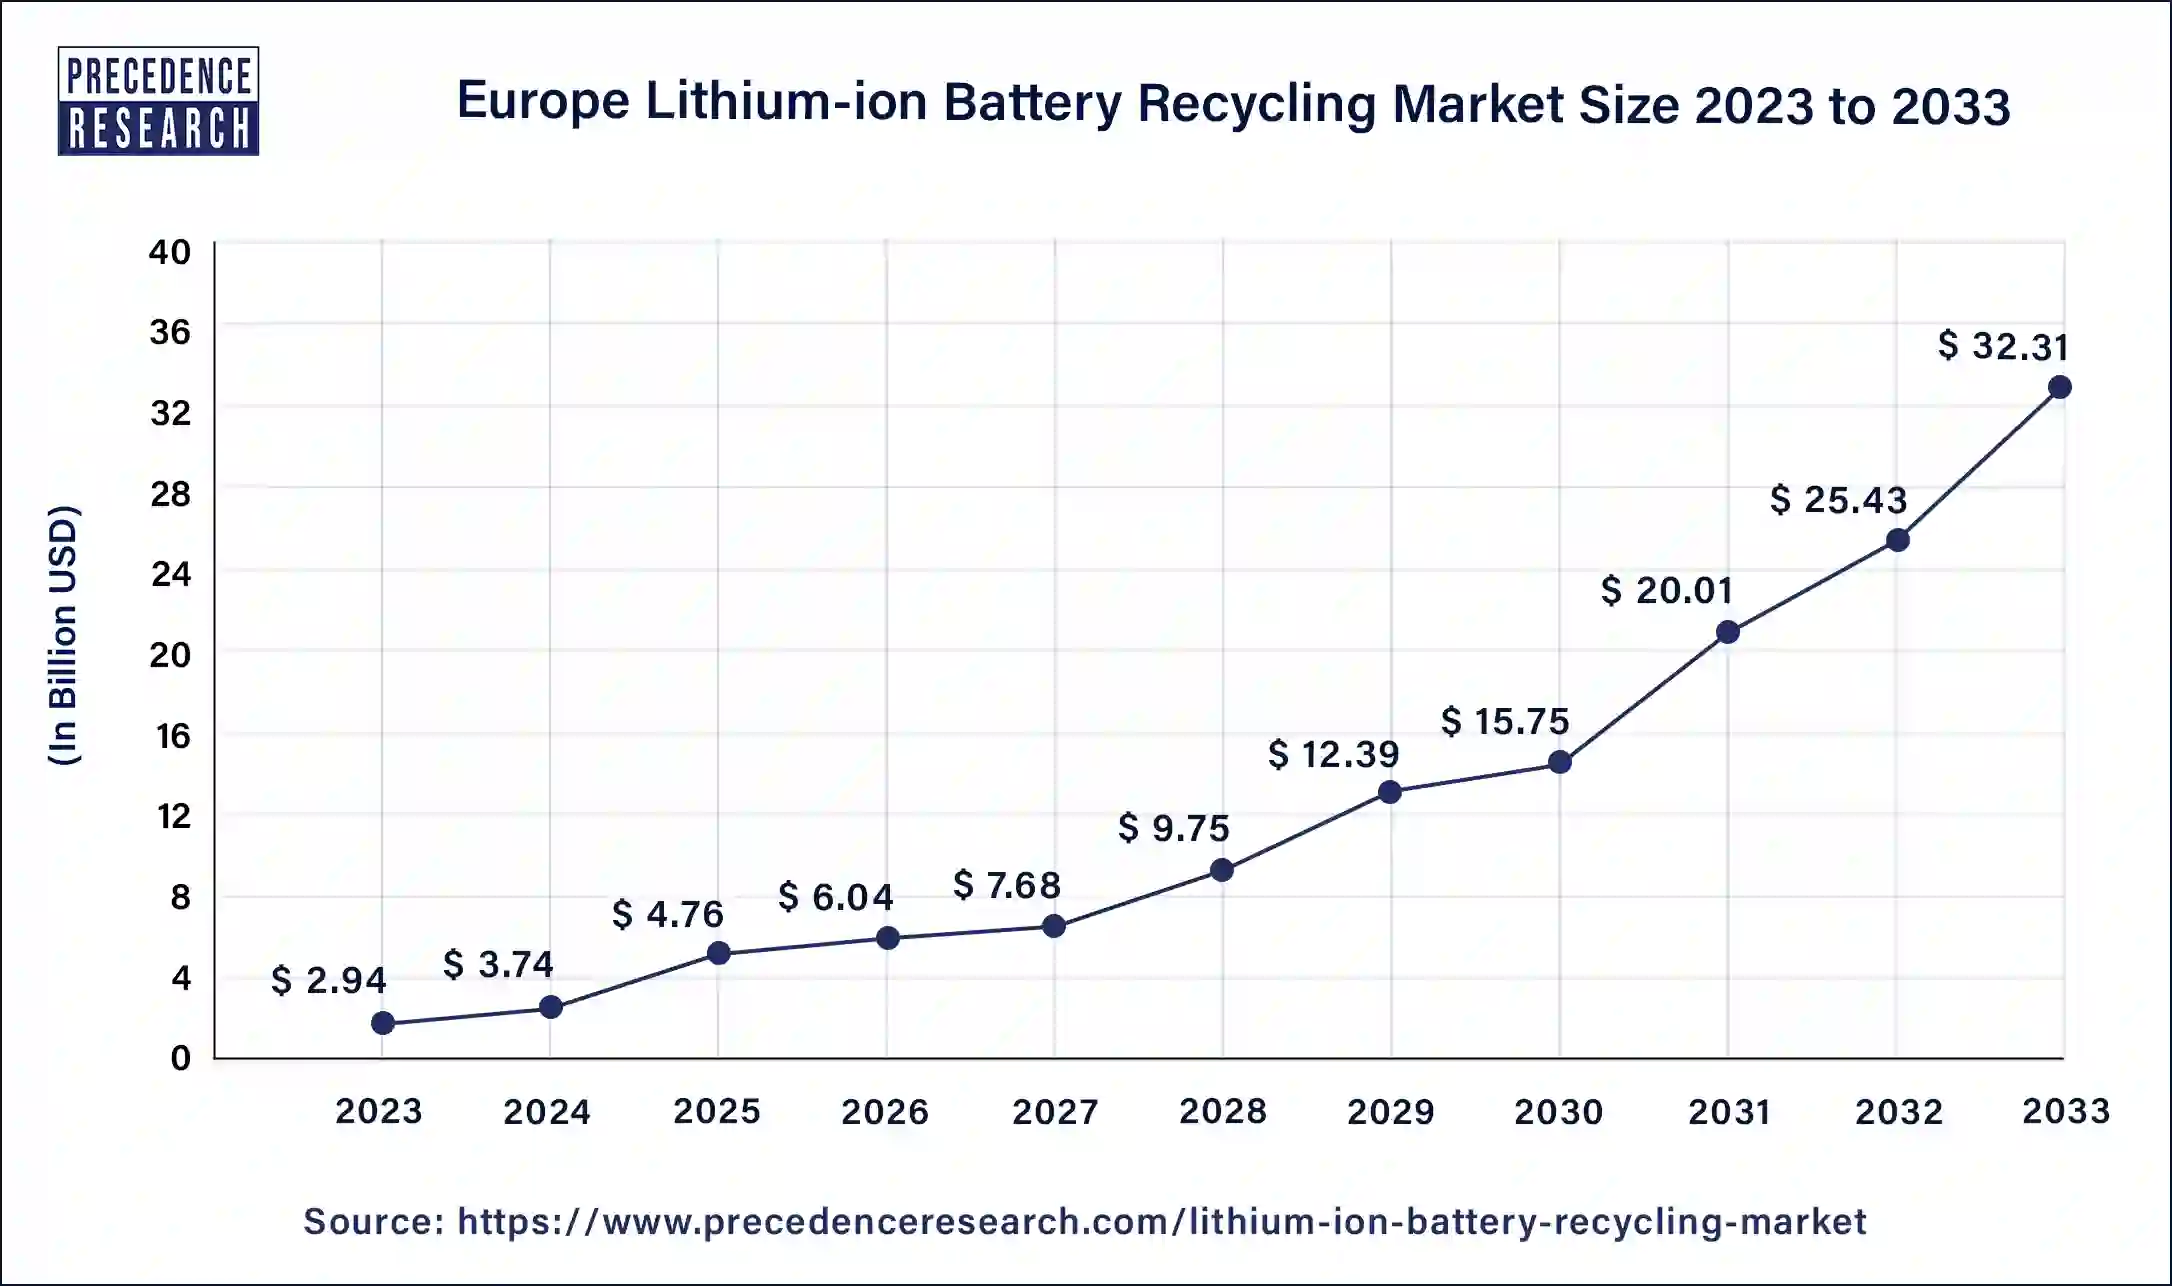 Europe Lithium-ion Battery Recycling Market Size 2024 to 2033